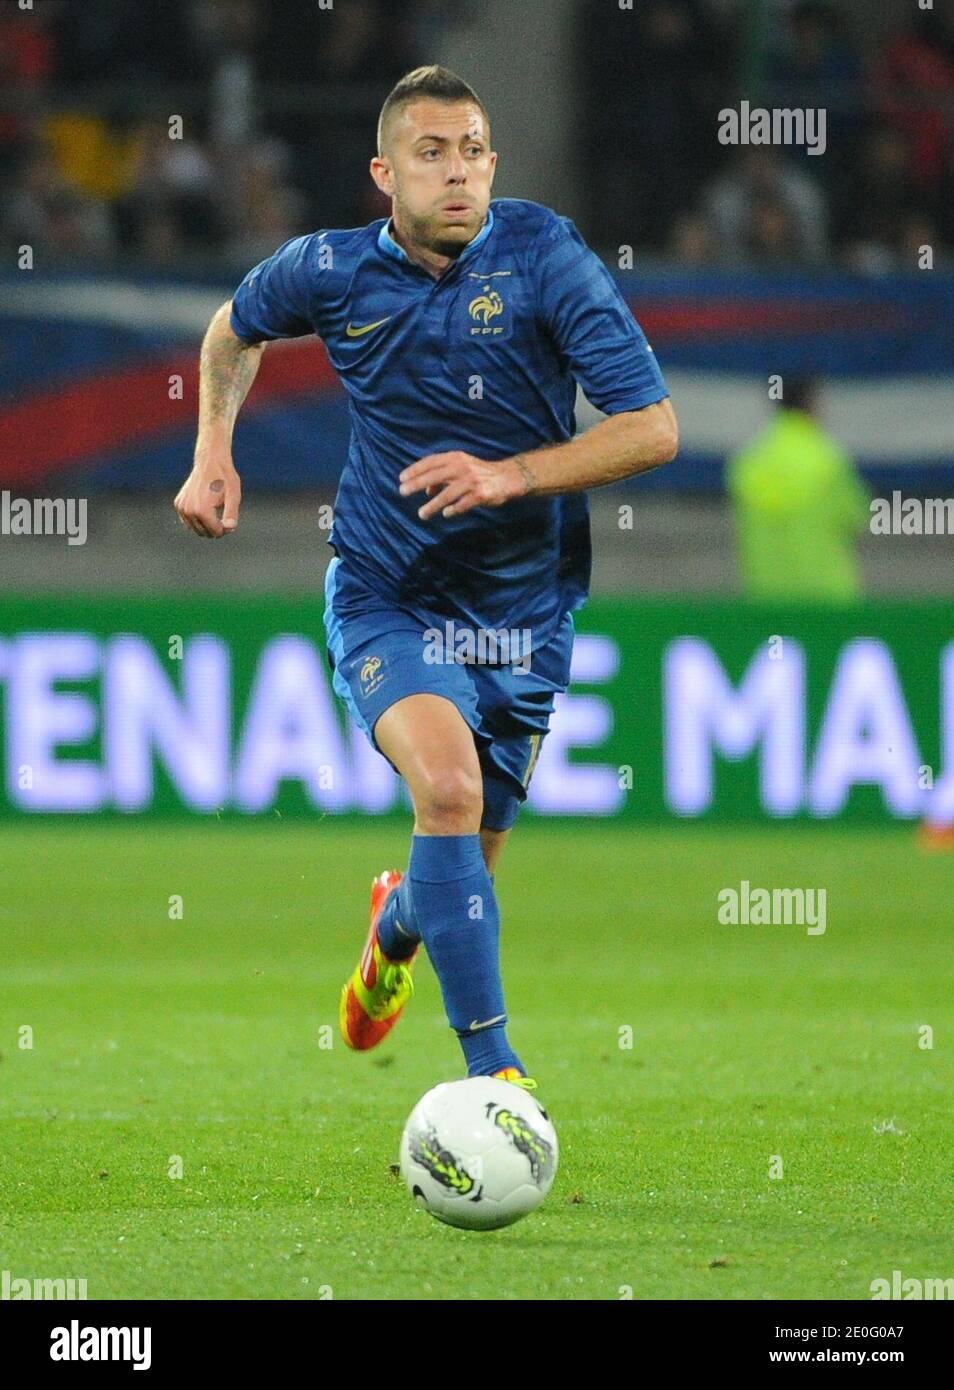 France's Jeremy Menez during an International Friendly soccer match, France Vs Estonia at MMArena stadium in Le Mans, France, on June 5, 2012. France won 4-0. Photo by ABACAPRESS.COM Stock Photo